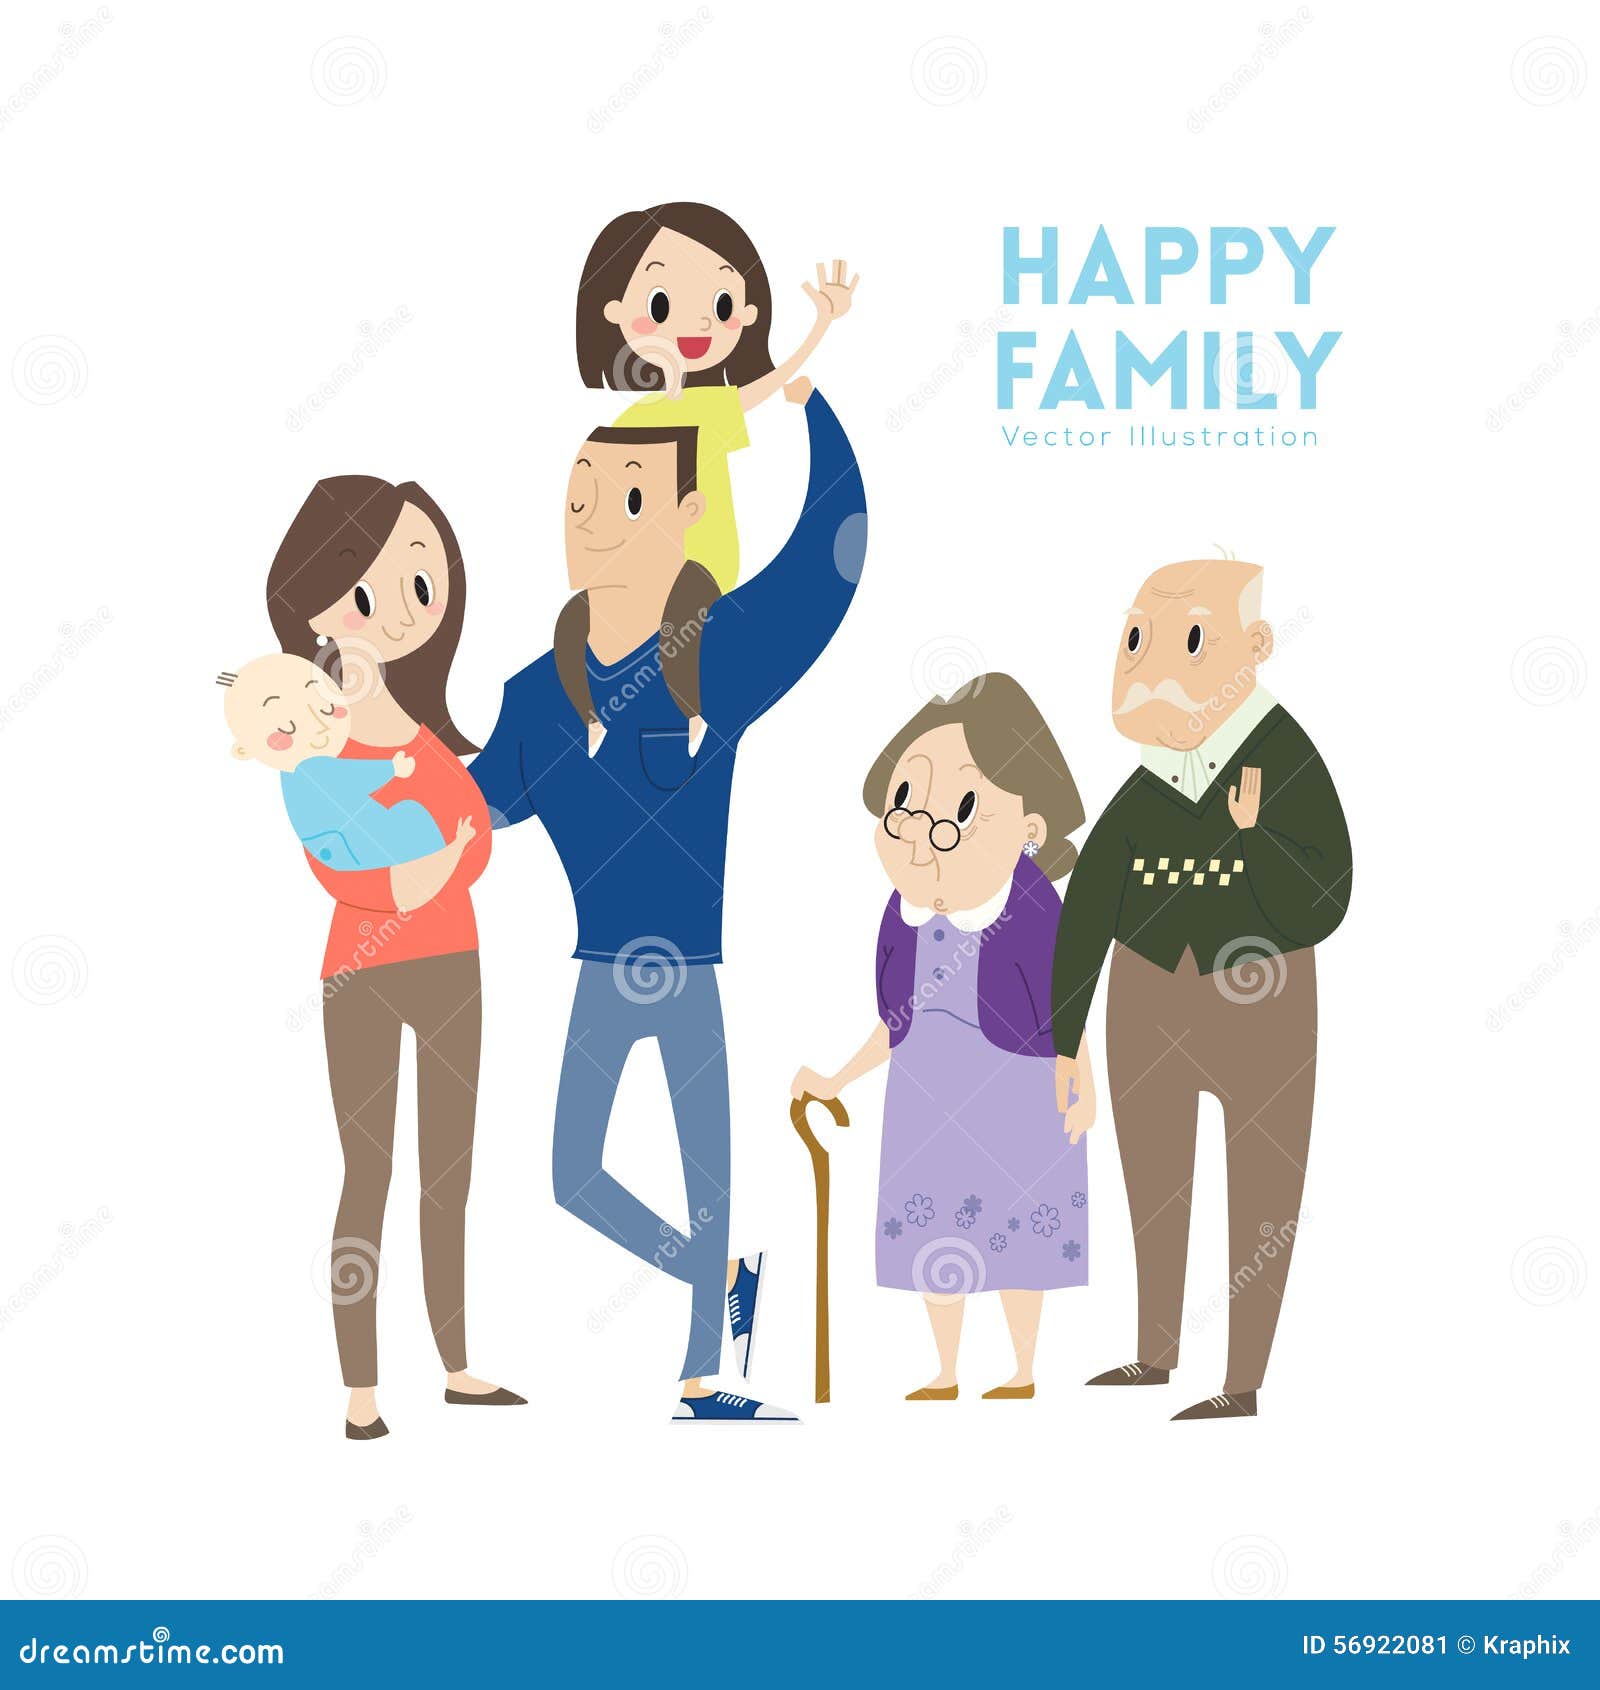 free clipart of a happy family - photo #39